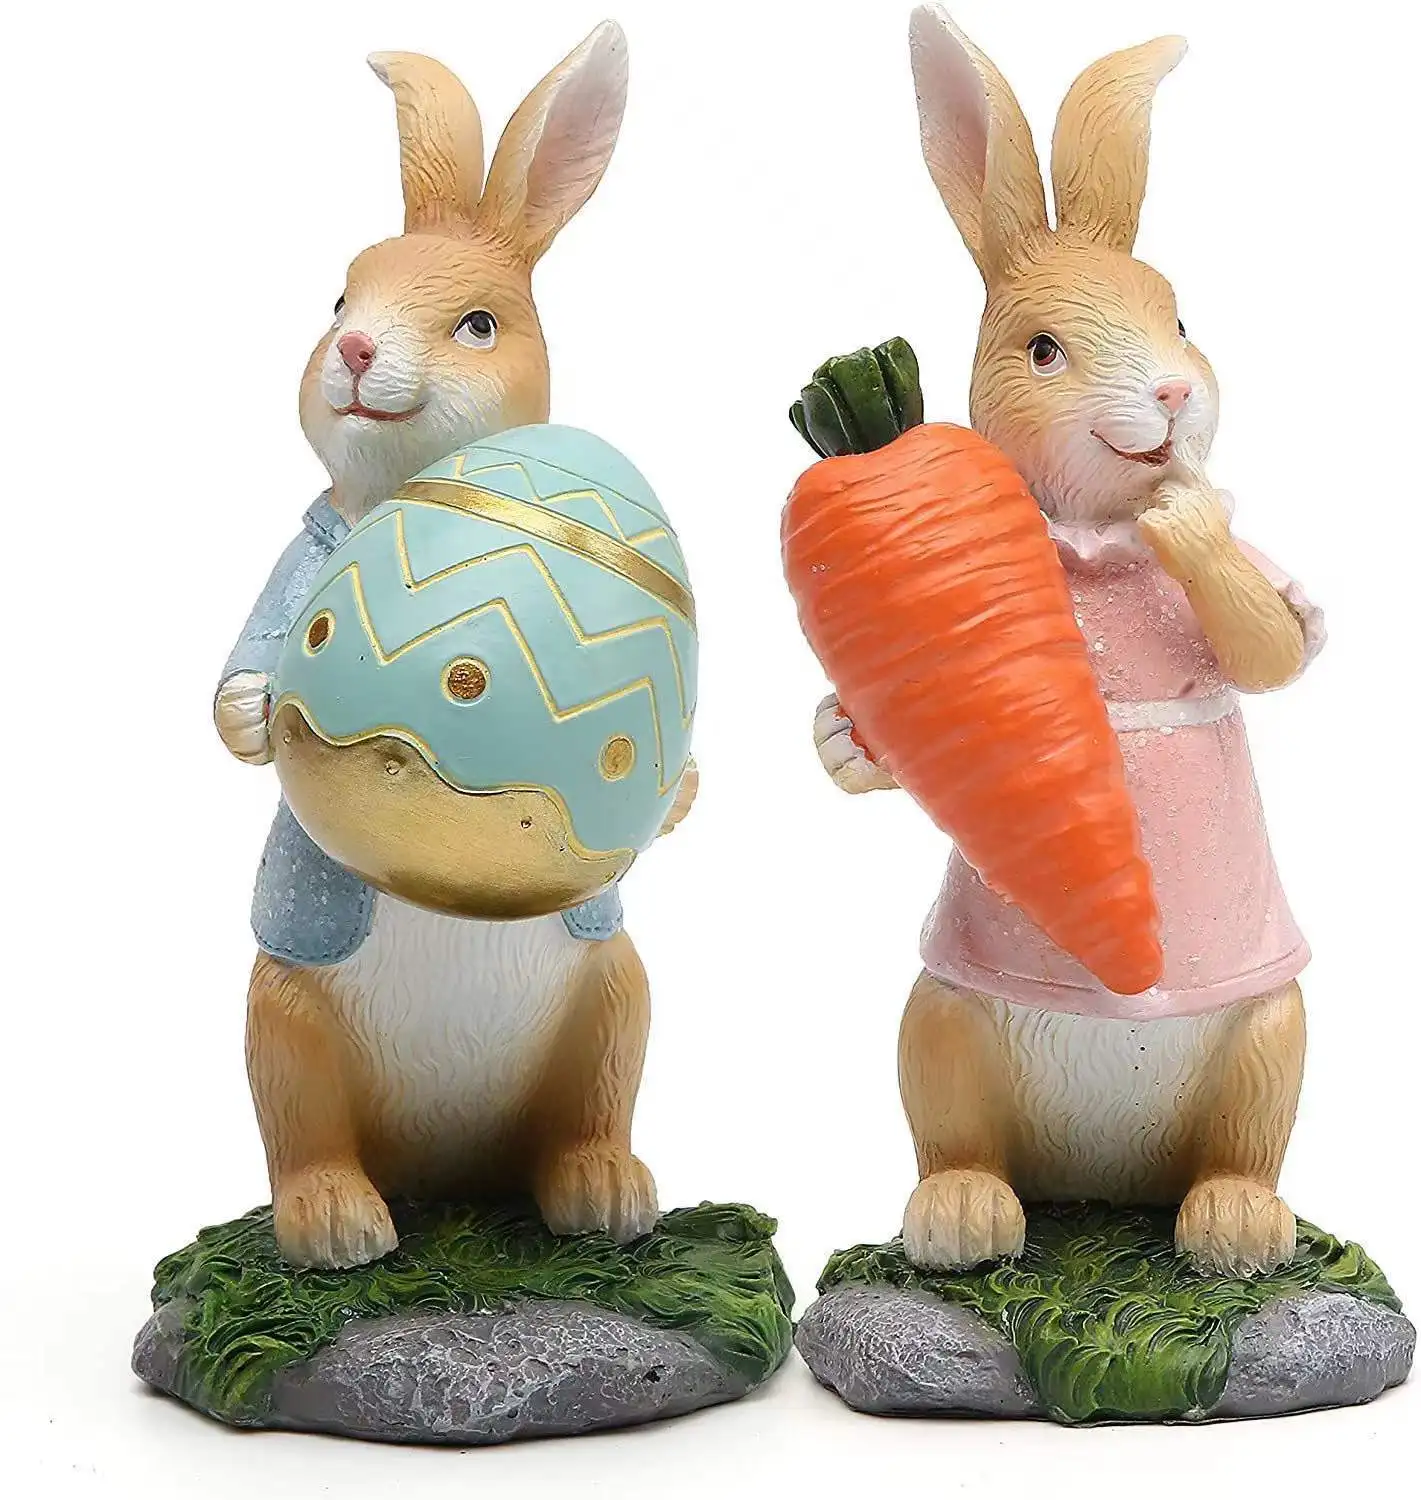 Easter Bunny Statue Standing Rabbit Decoration Rabbits Garden Statues And Figurines Cute Bunnies With Carrot Easter Egg Decor